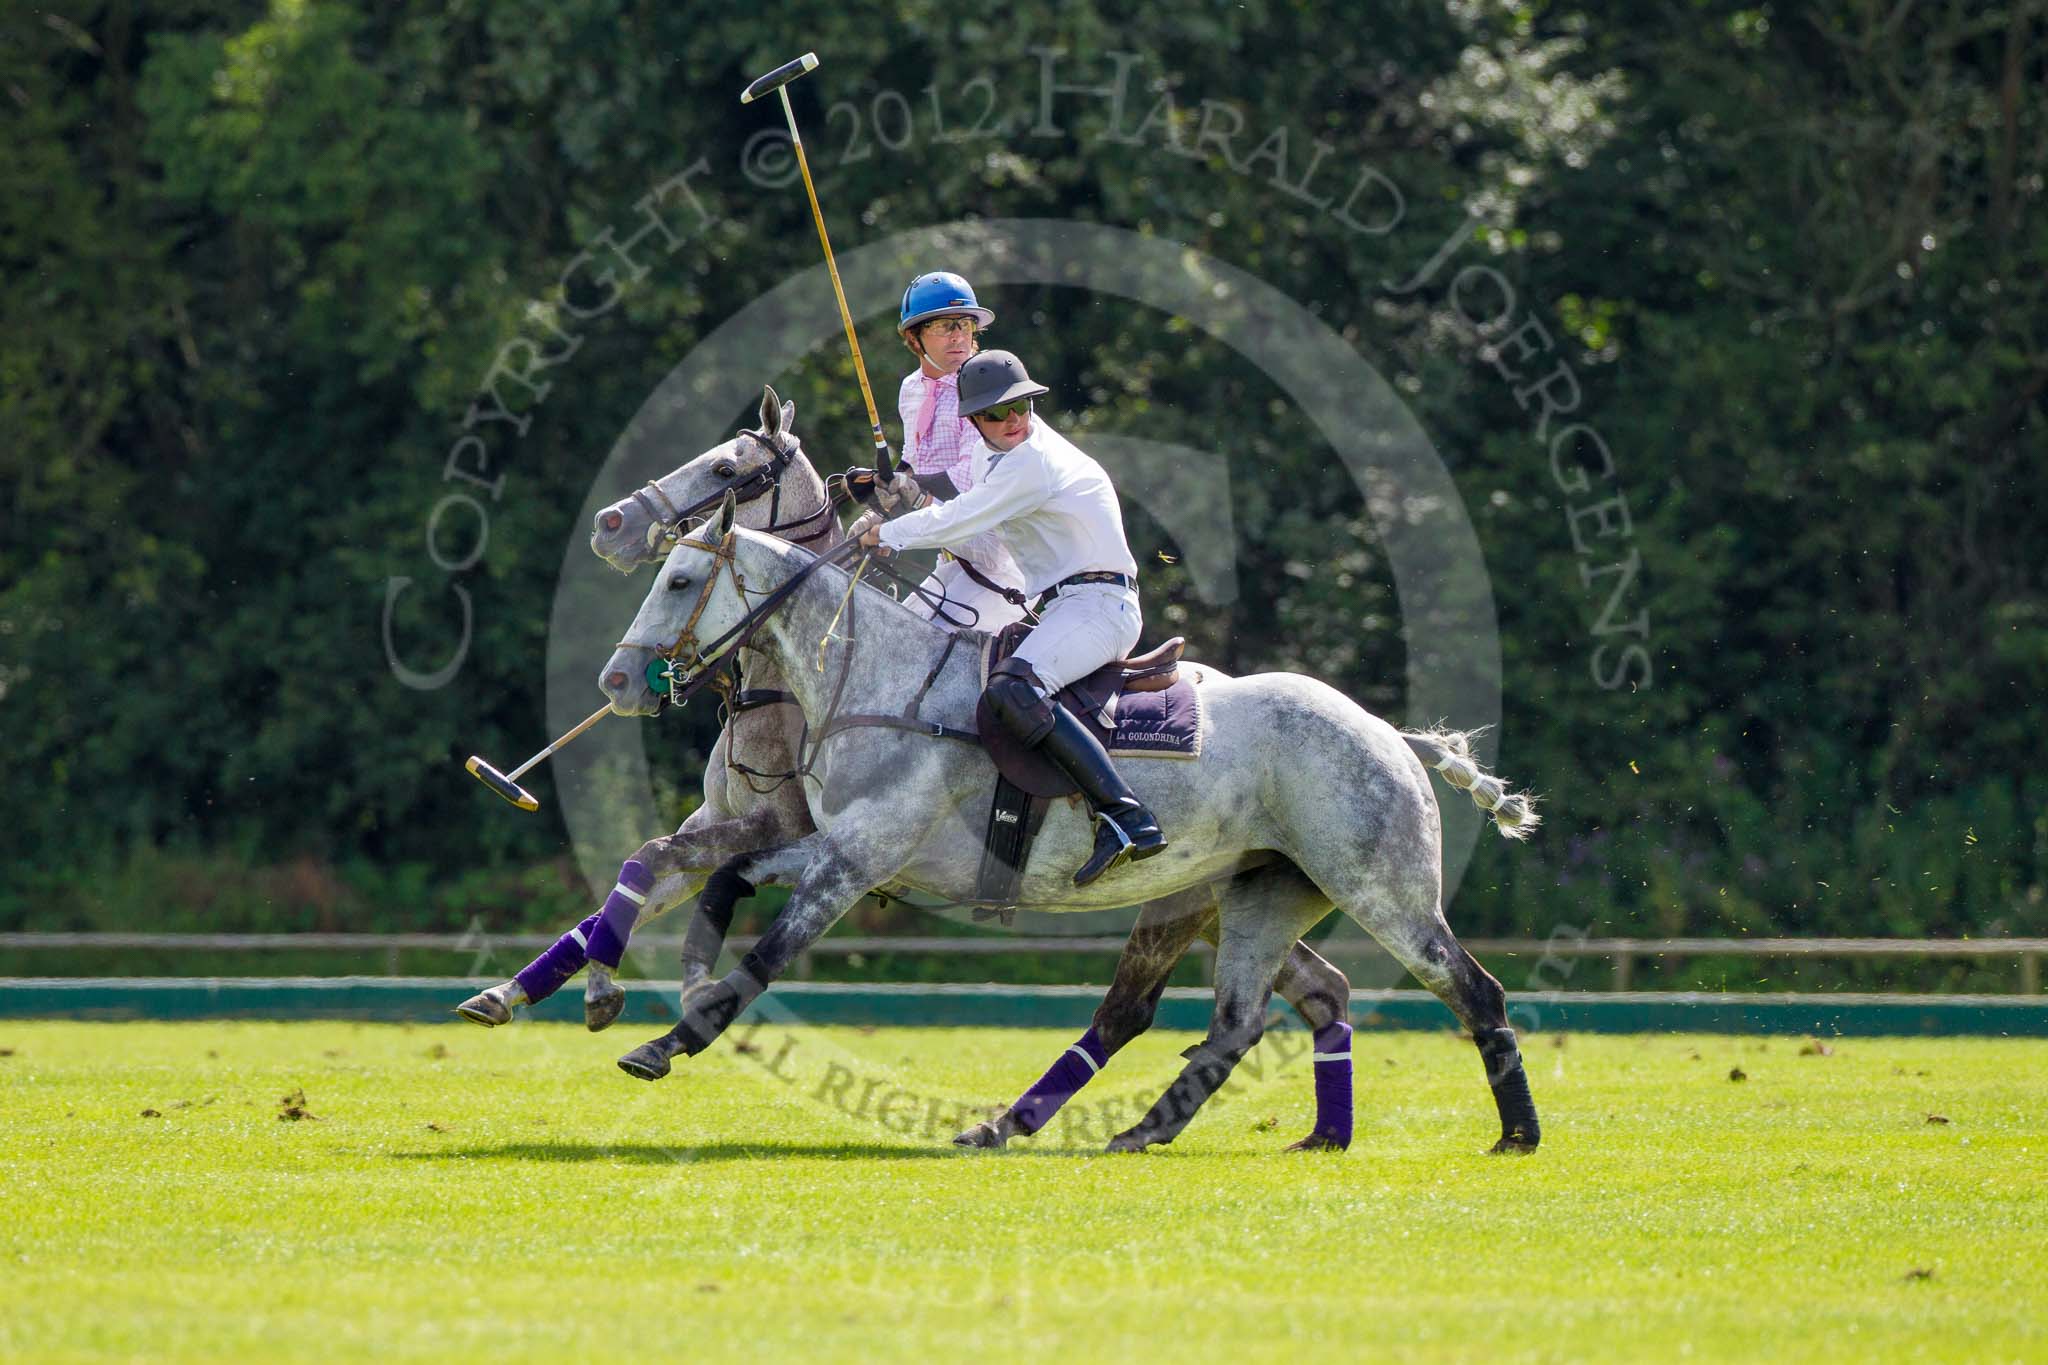 7th Heritage Polo Cup finals: Pedro Harrison waiting for the pass..
Hurtwood Park Polo Club,
Ewhurst Green,
Surrey,
United Kingdom,
on 05 August 2012 at 15:24, image #162